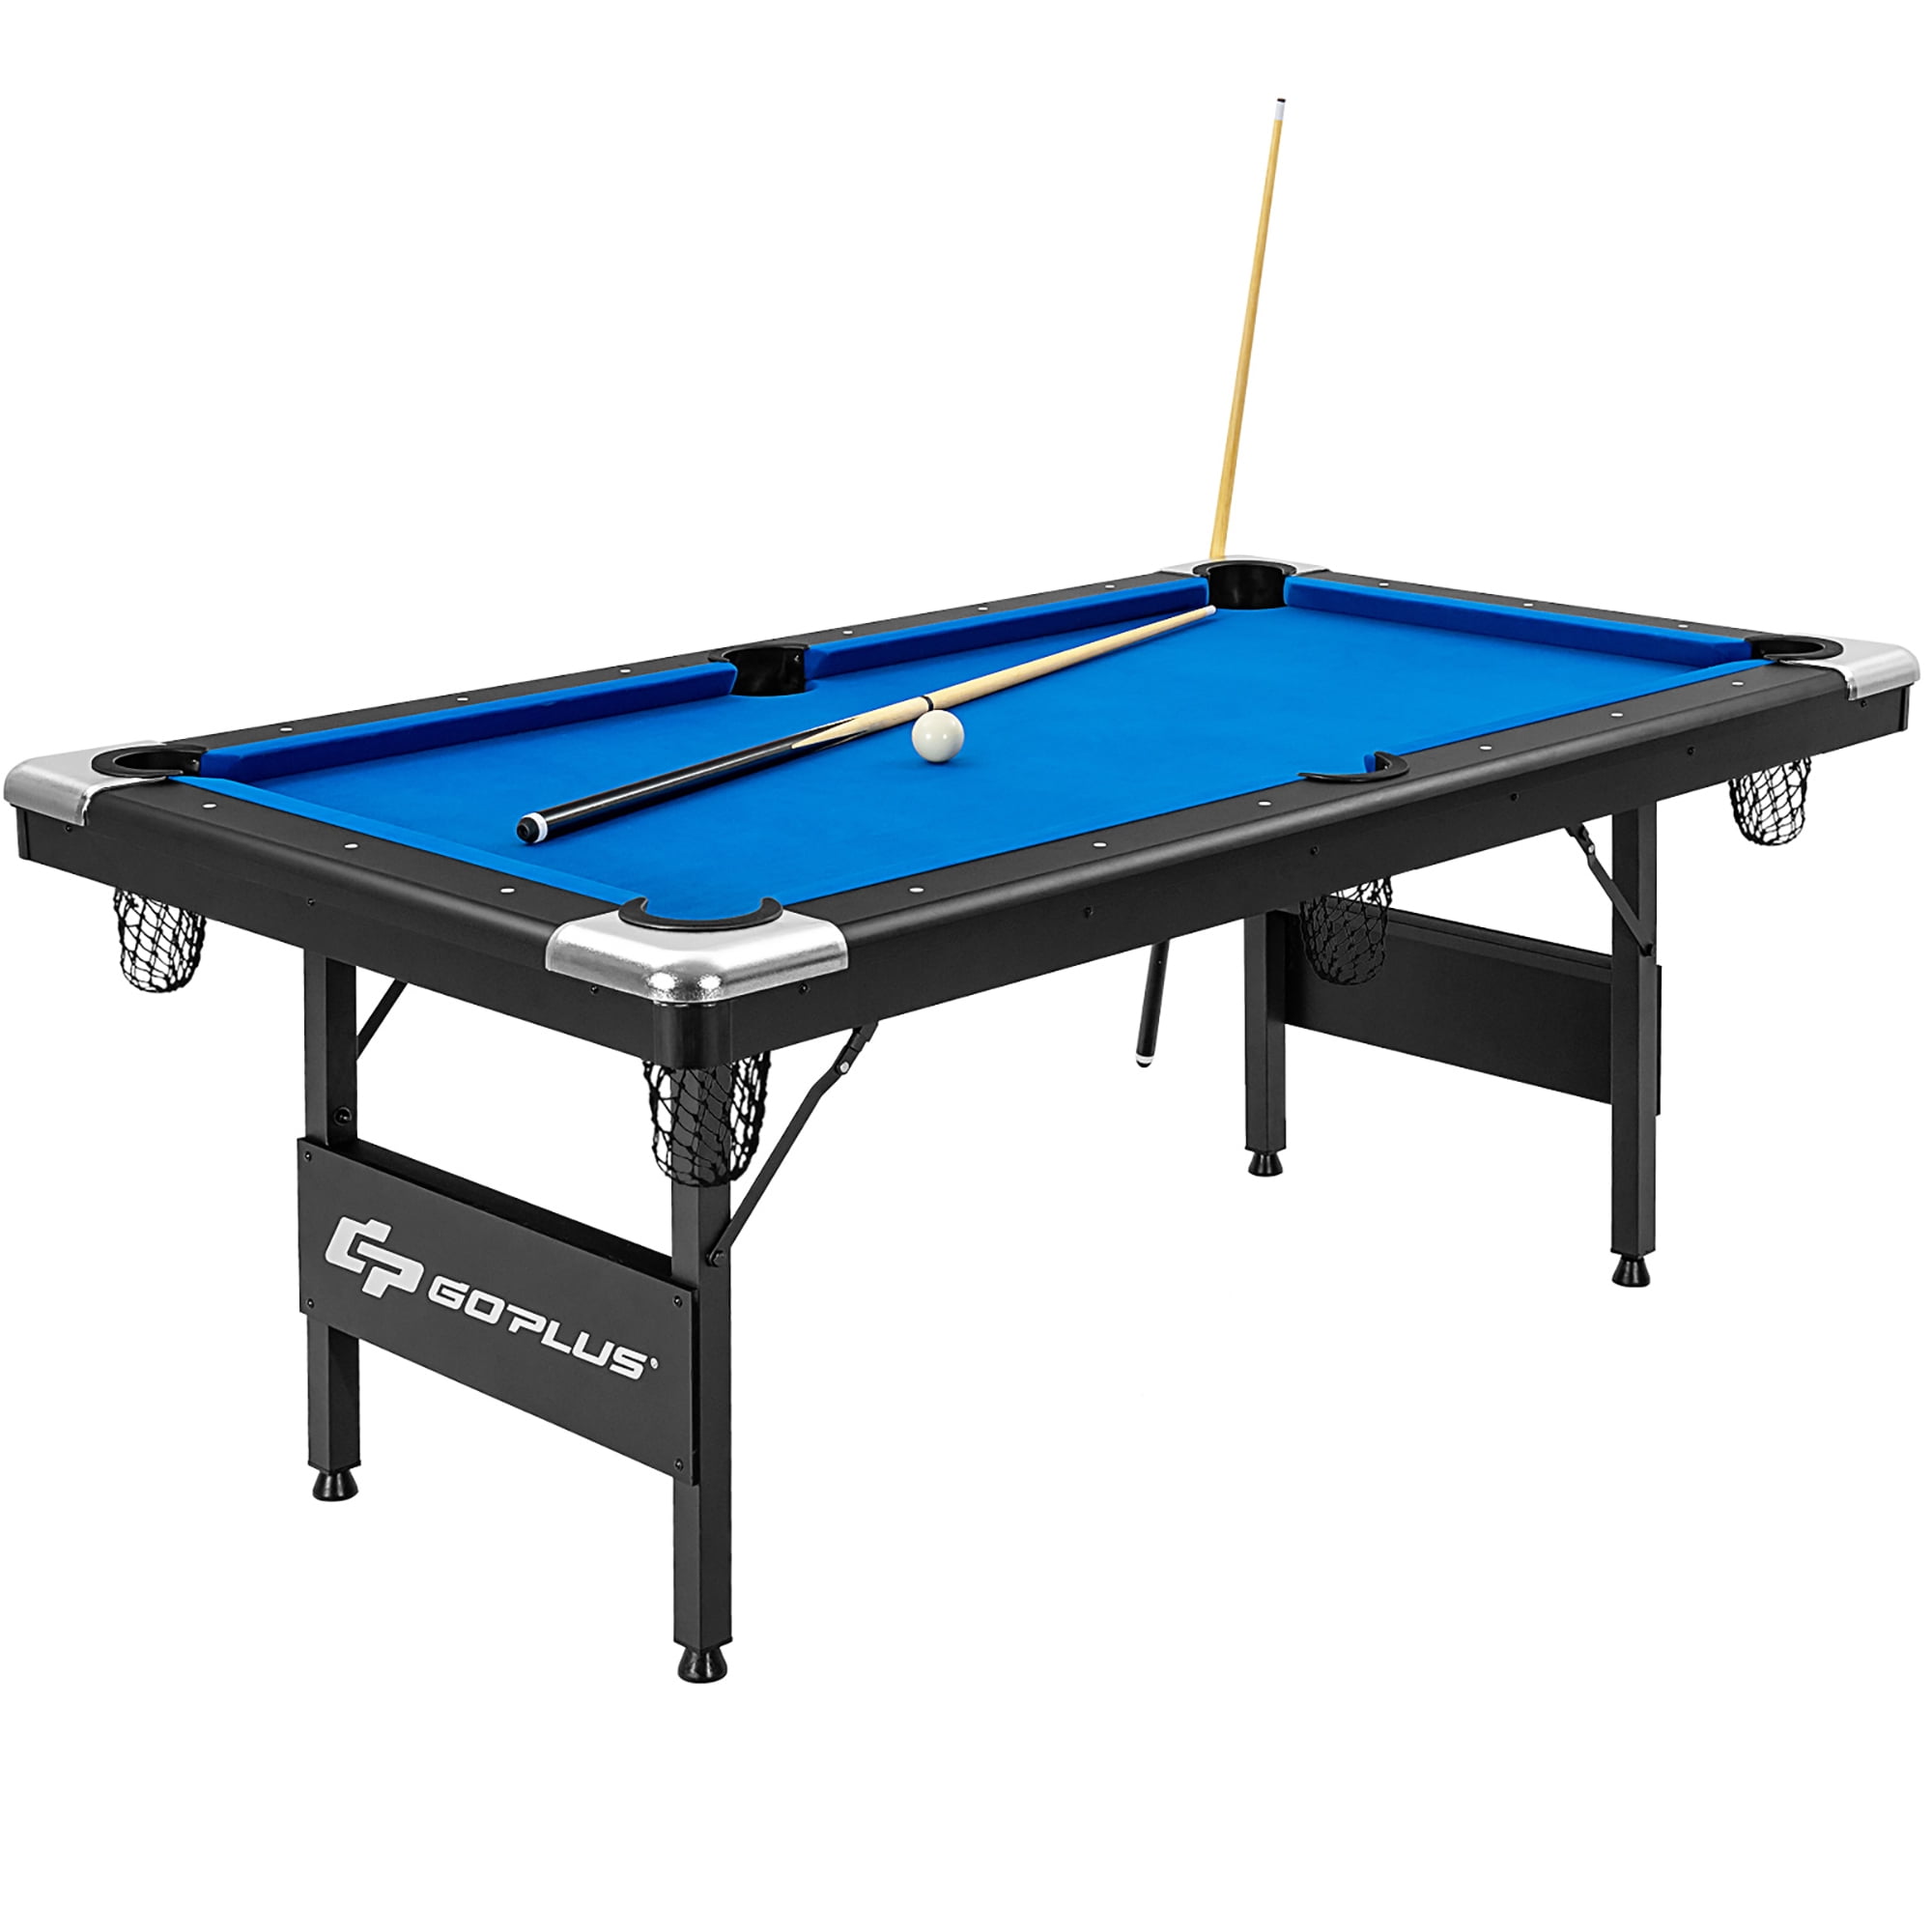 Goplus 6 FT Billiard Table 76 Inch Foldable Pool Table Perfect for